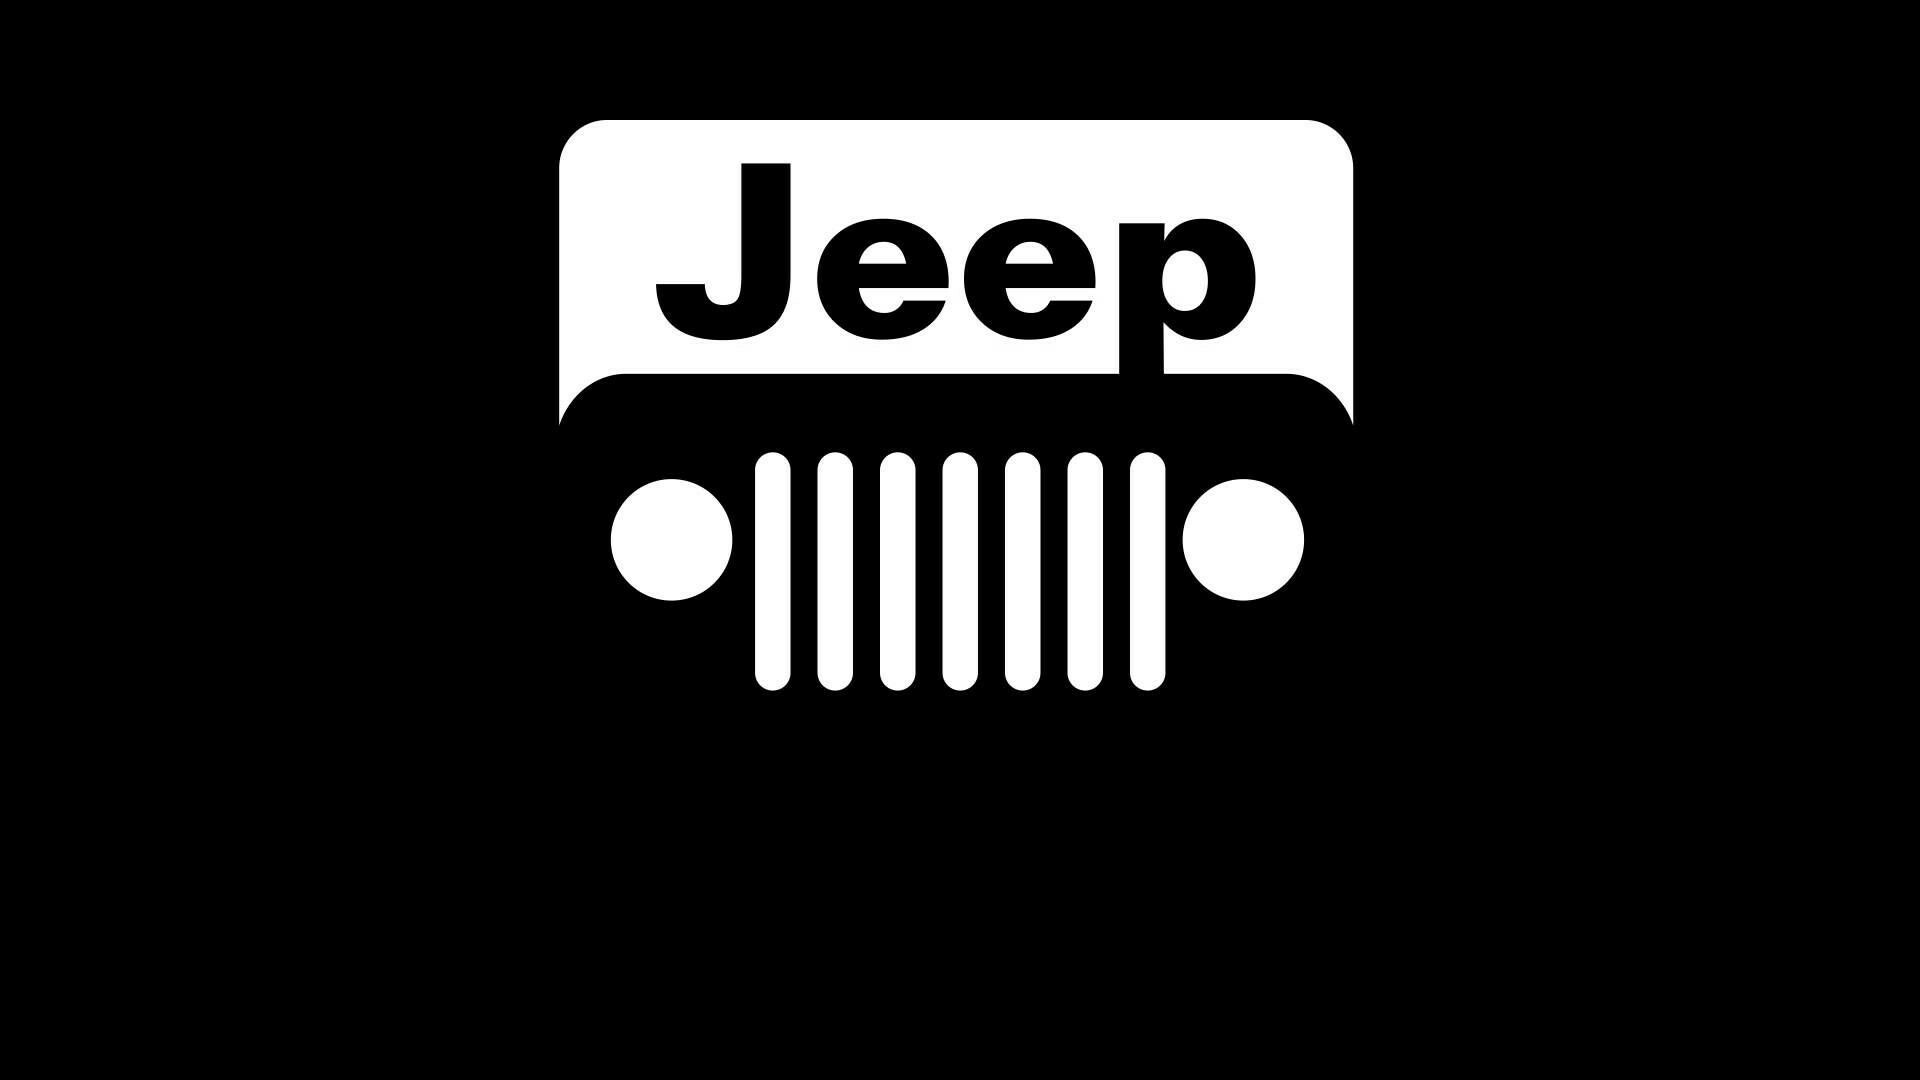 Jeep: Brand logo, Graphic, Off-road vehicles. 1920x1080 Full HD Wallpaper.